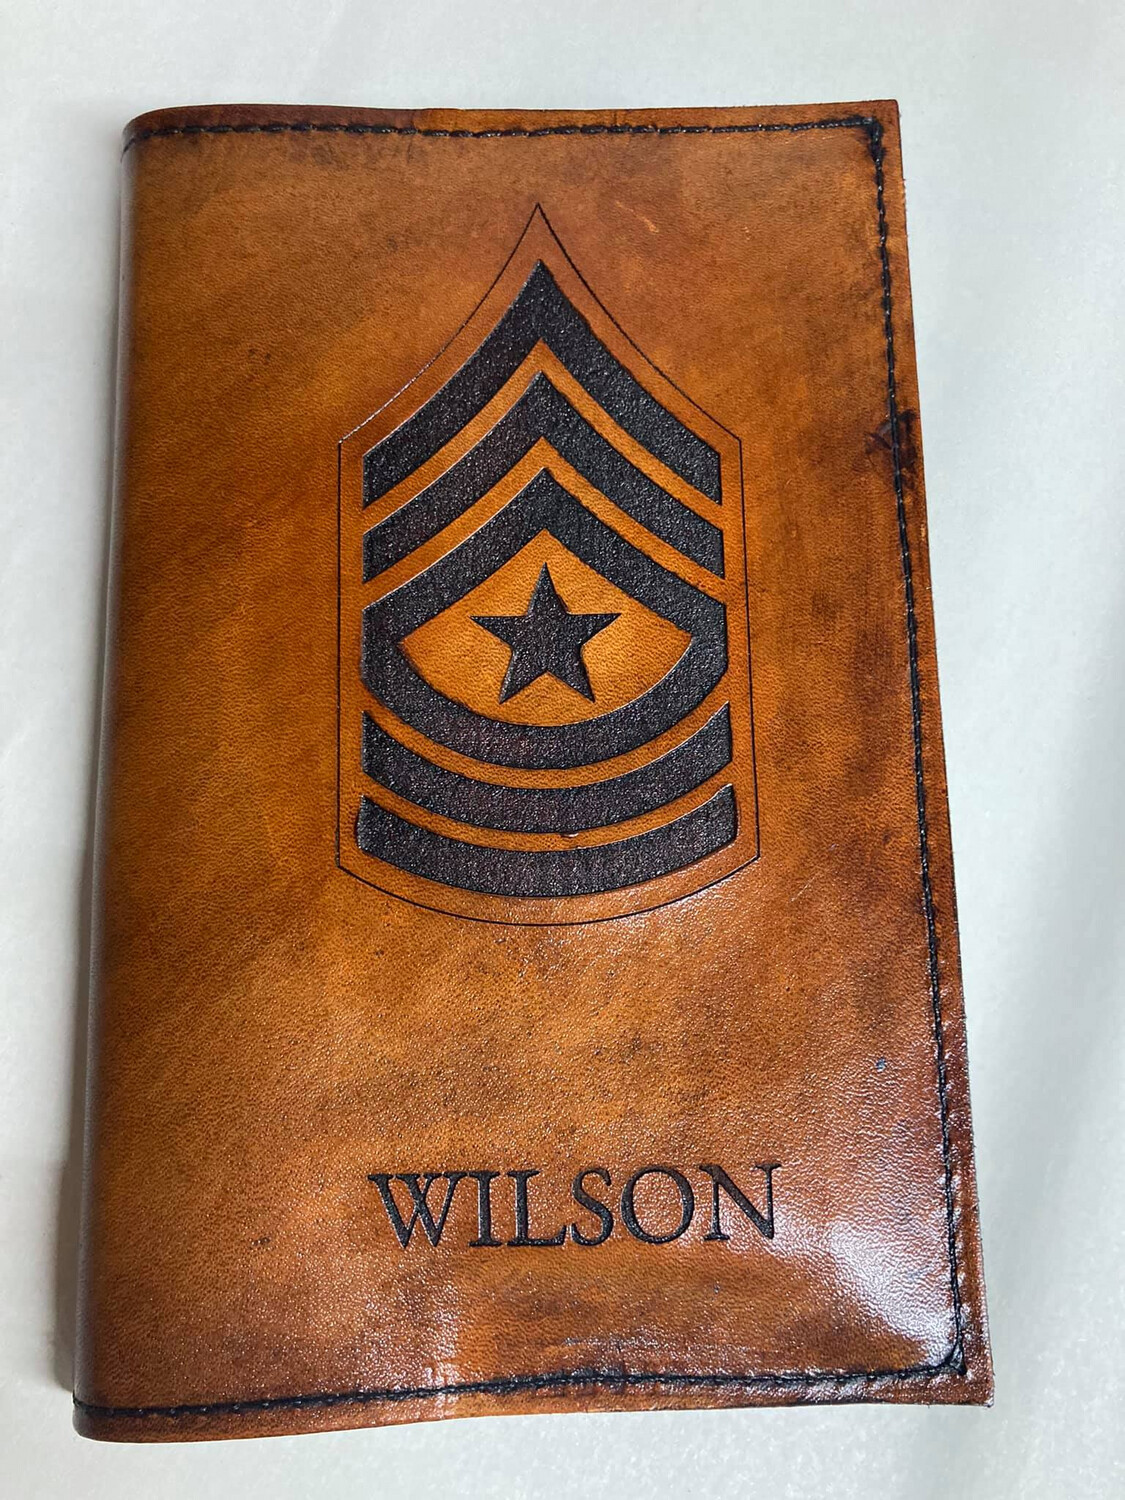 Military Rank, Personalized Leather Book Cover , Military Journal - Mens Notebook - NCO Gift - Military Gift - Refillable Notebook